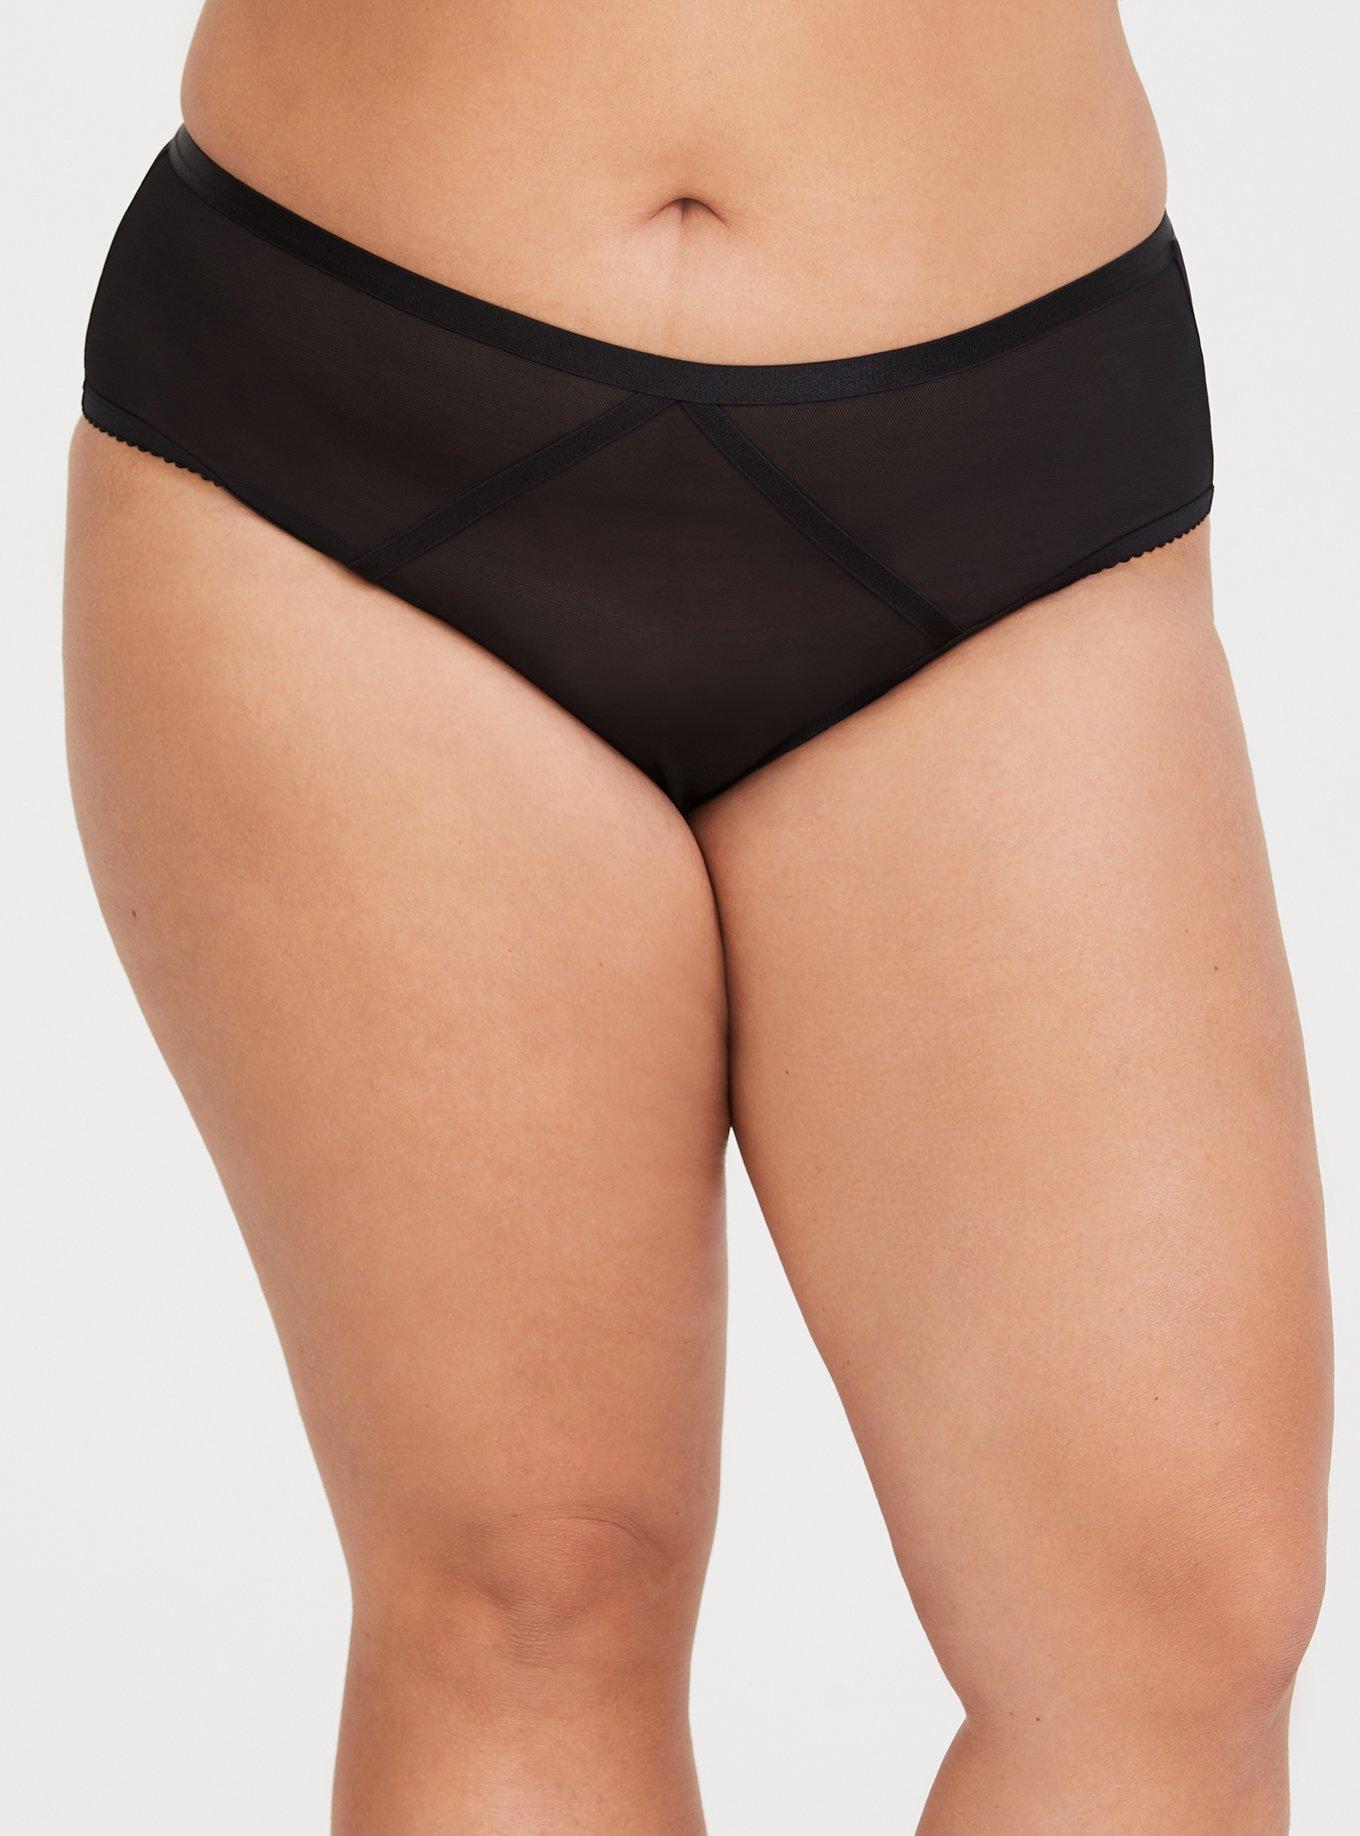 Plus Size - Simply Mesh Hipster Panty With Lattice Back - Torrid